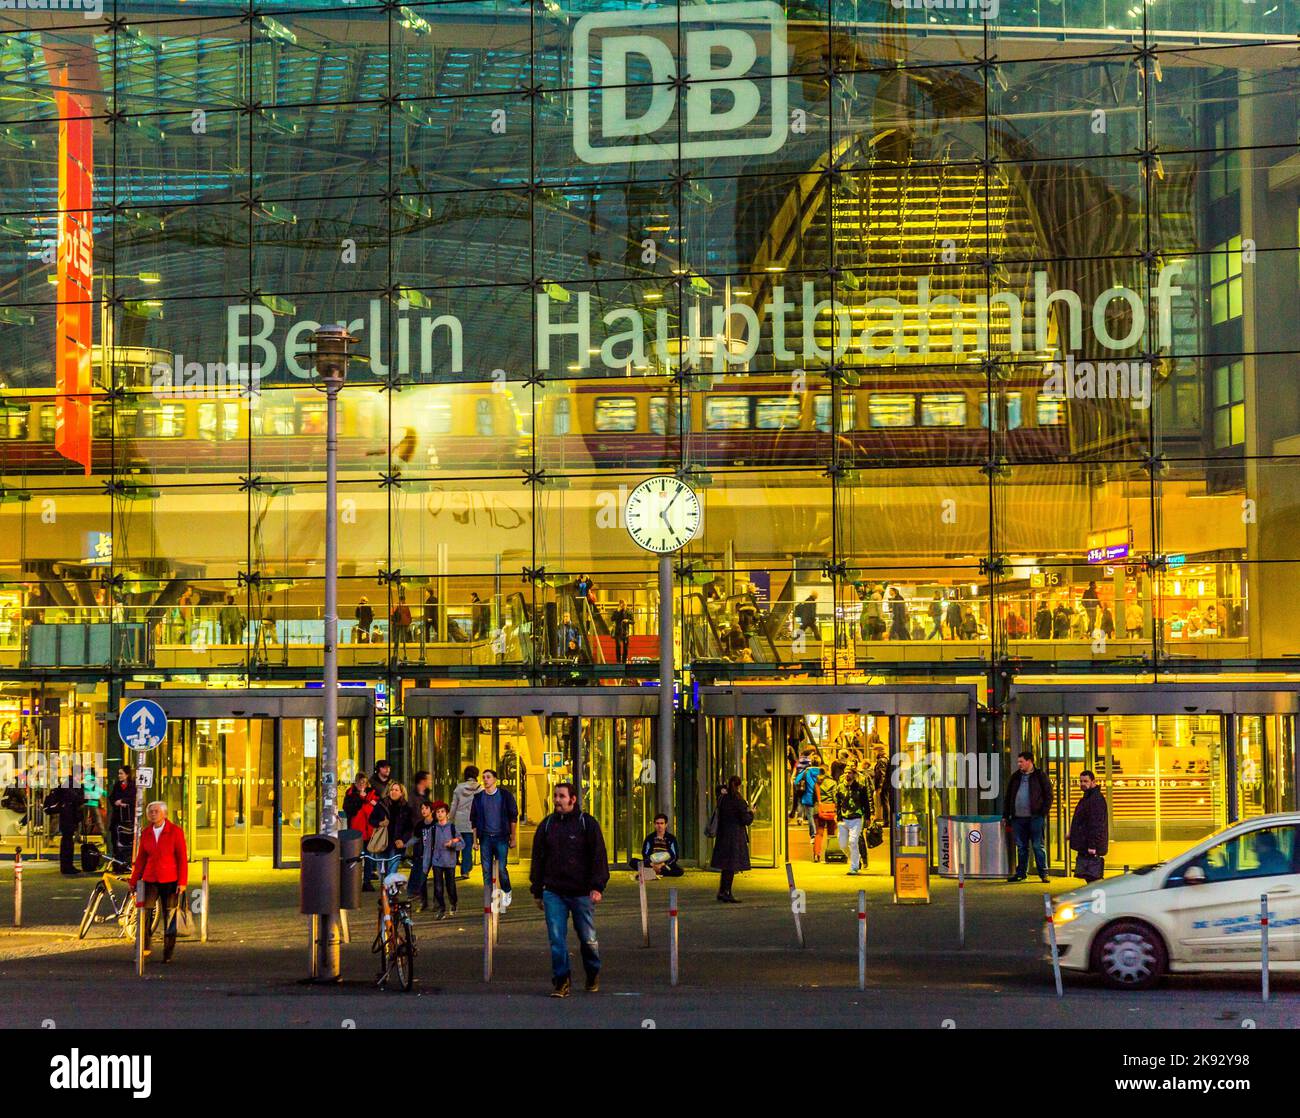 BERLIN, GERMANY - OCT 27, 2014: Berlin main station frontview by night in Berlin, Germany. This railway station came into full operation after a cerem Stock Photo